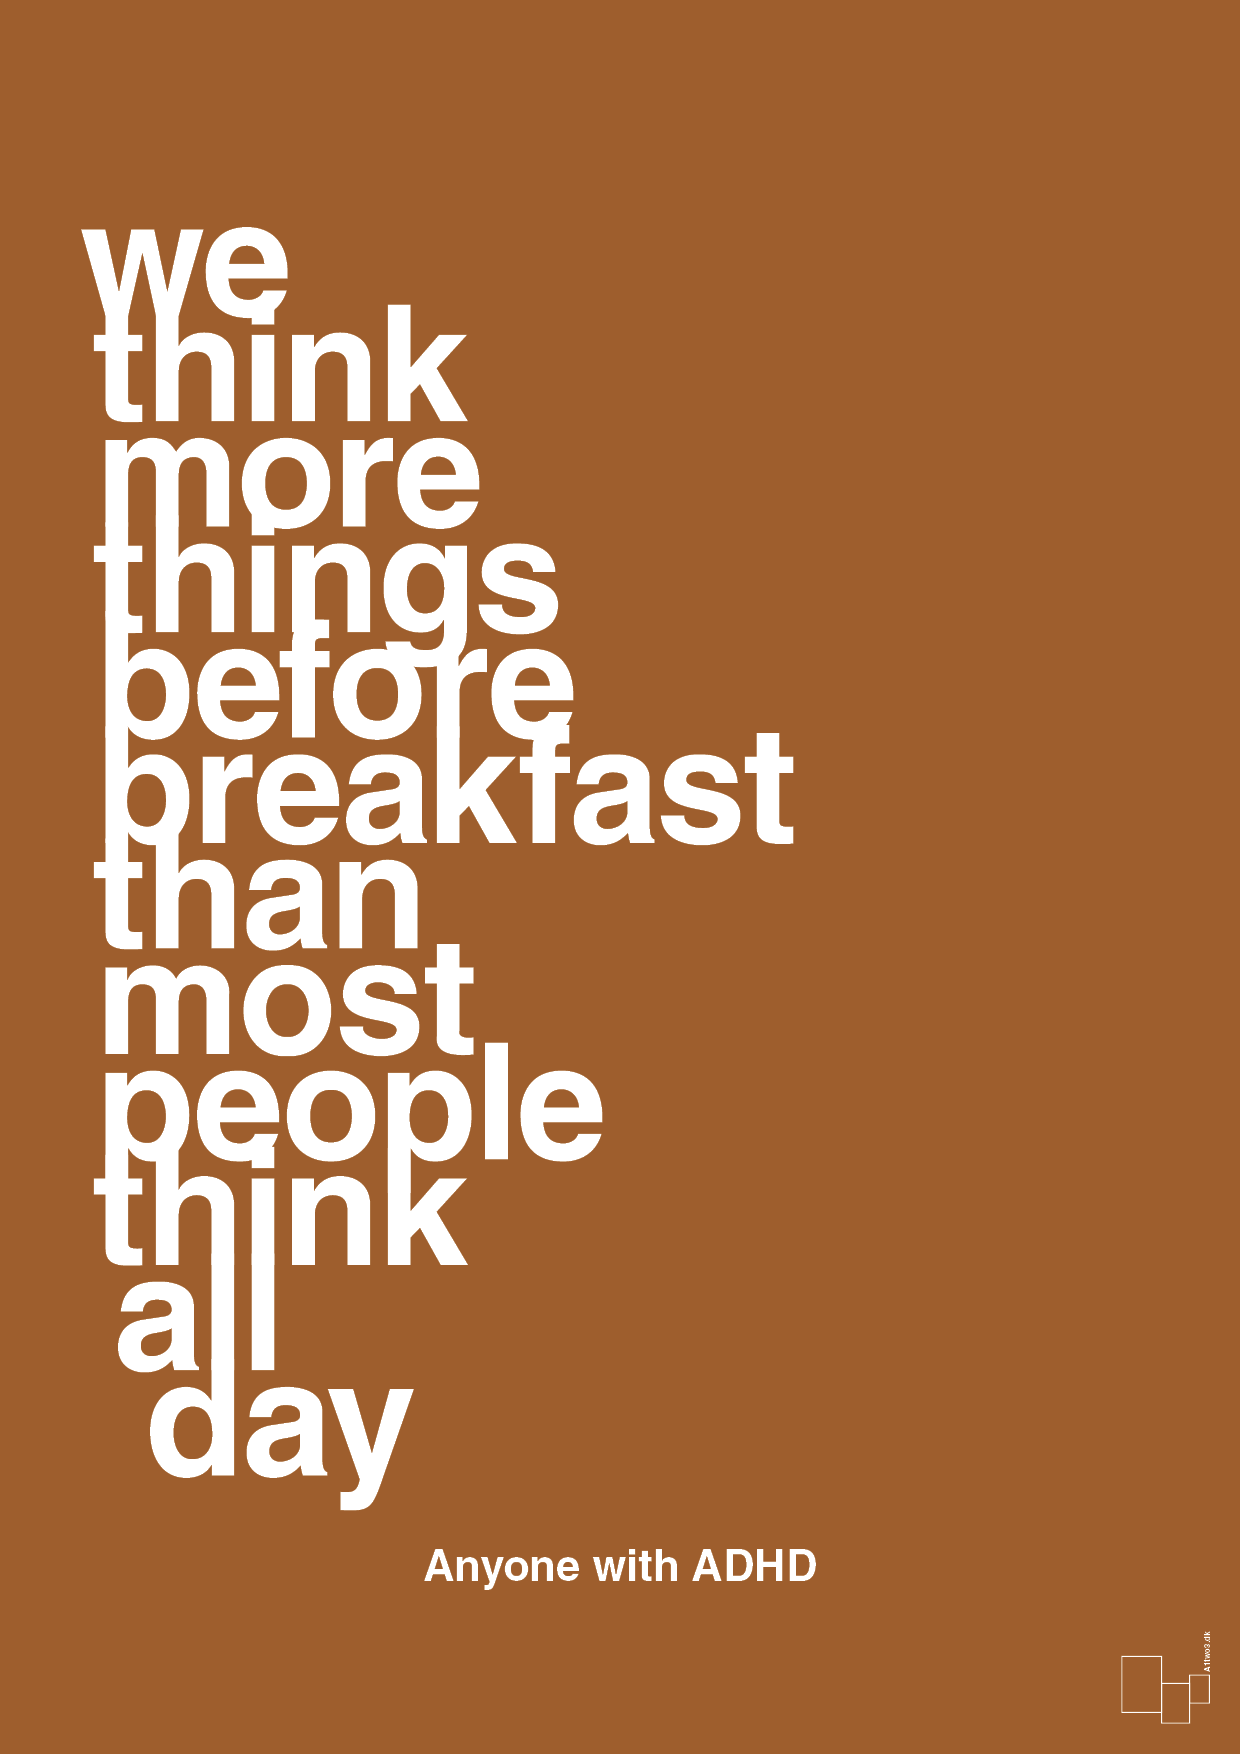 we think more things before breakfast than most people think all day - Plakat med Samfund i Cognac